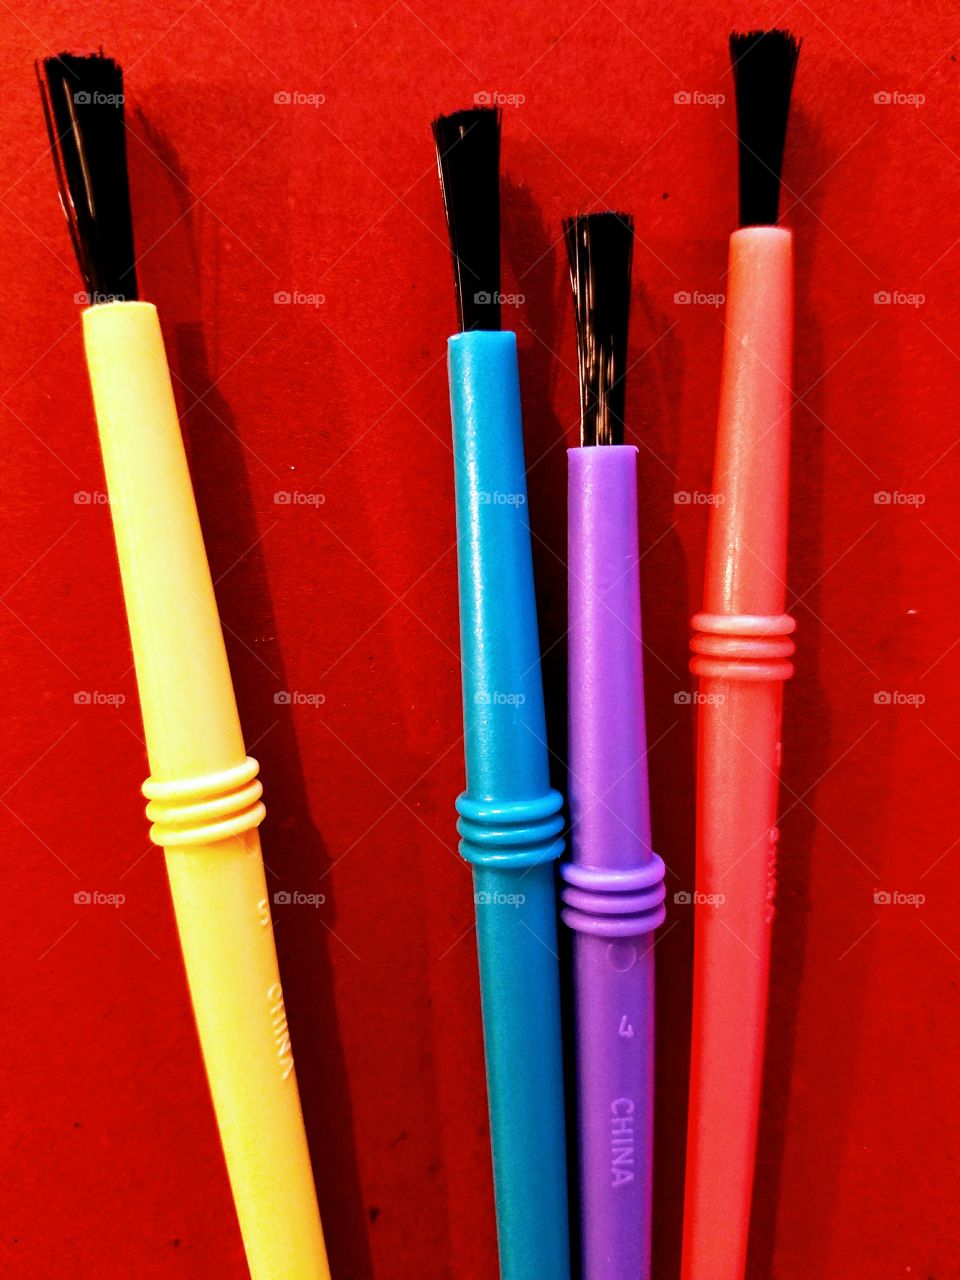 paintbrushes colored